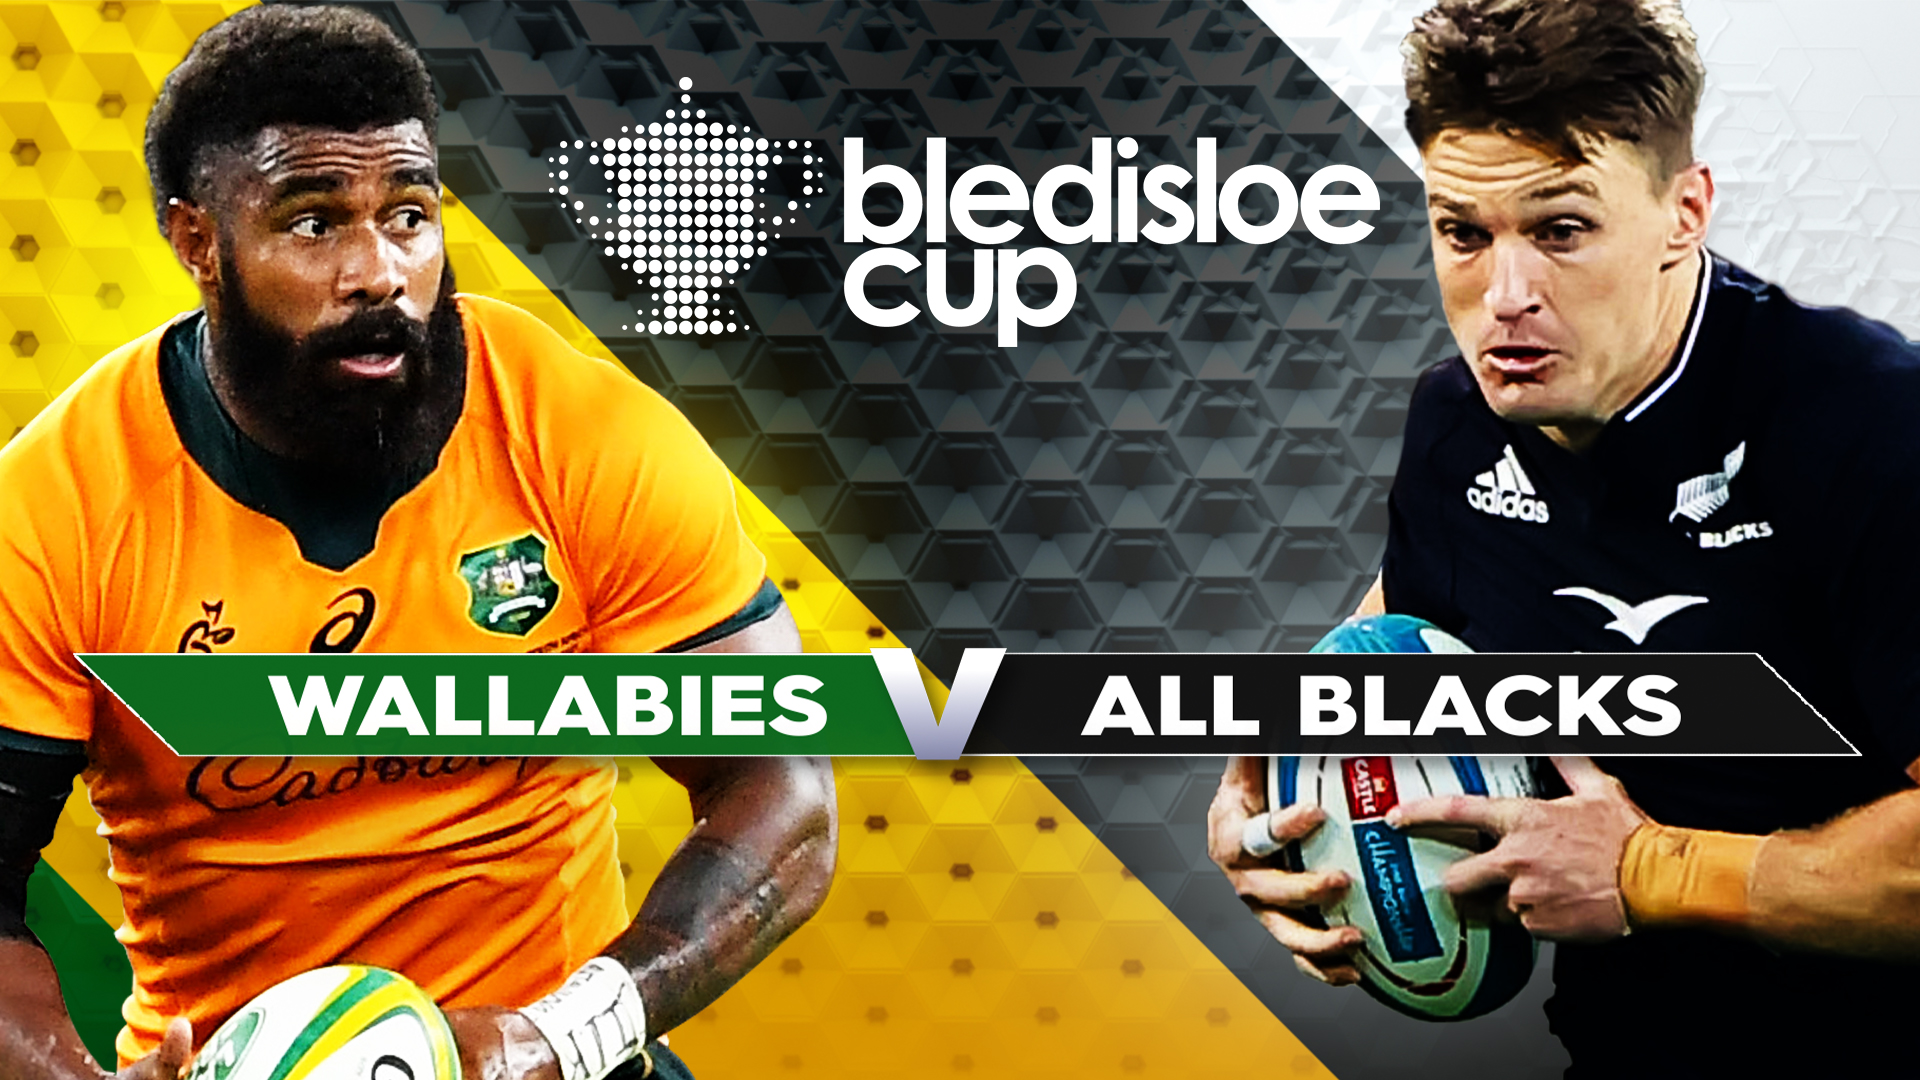 bledisloe cup how to watch